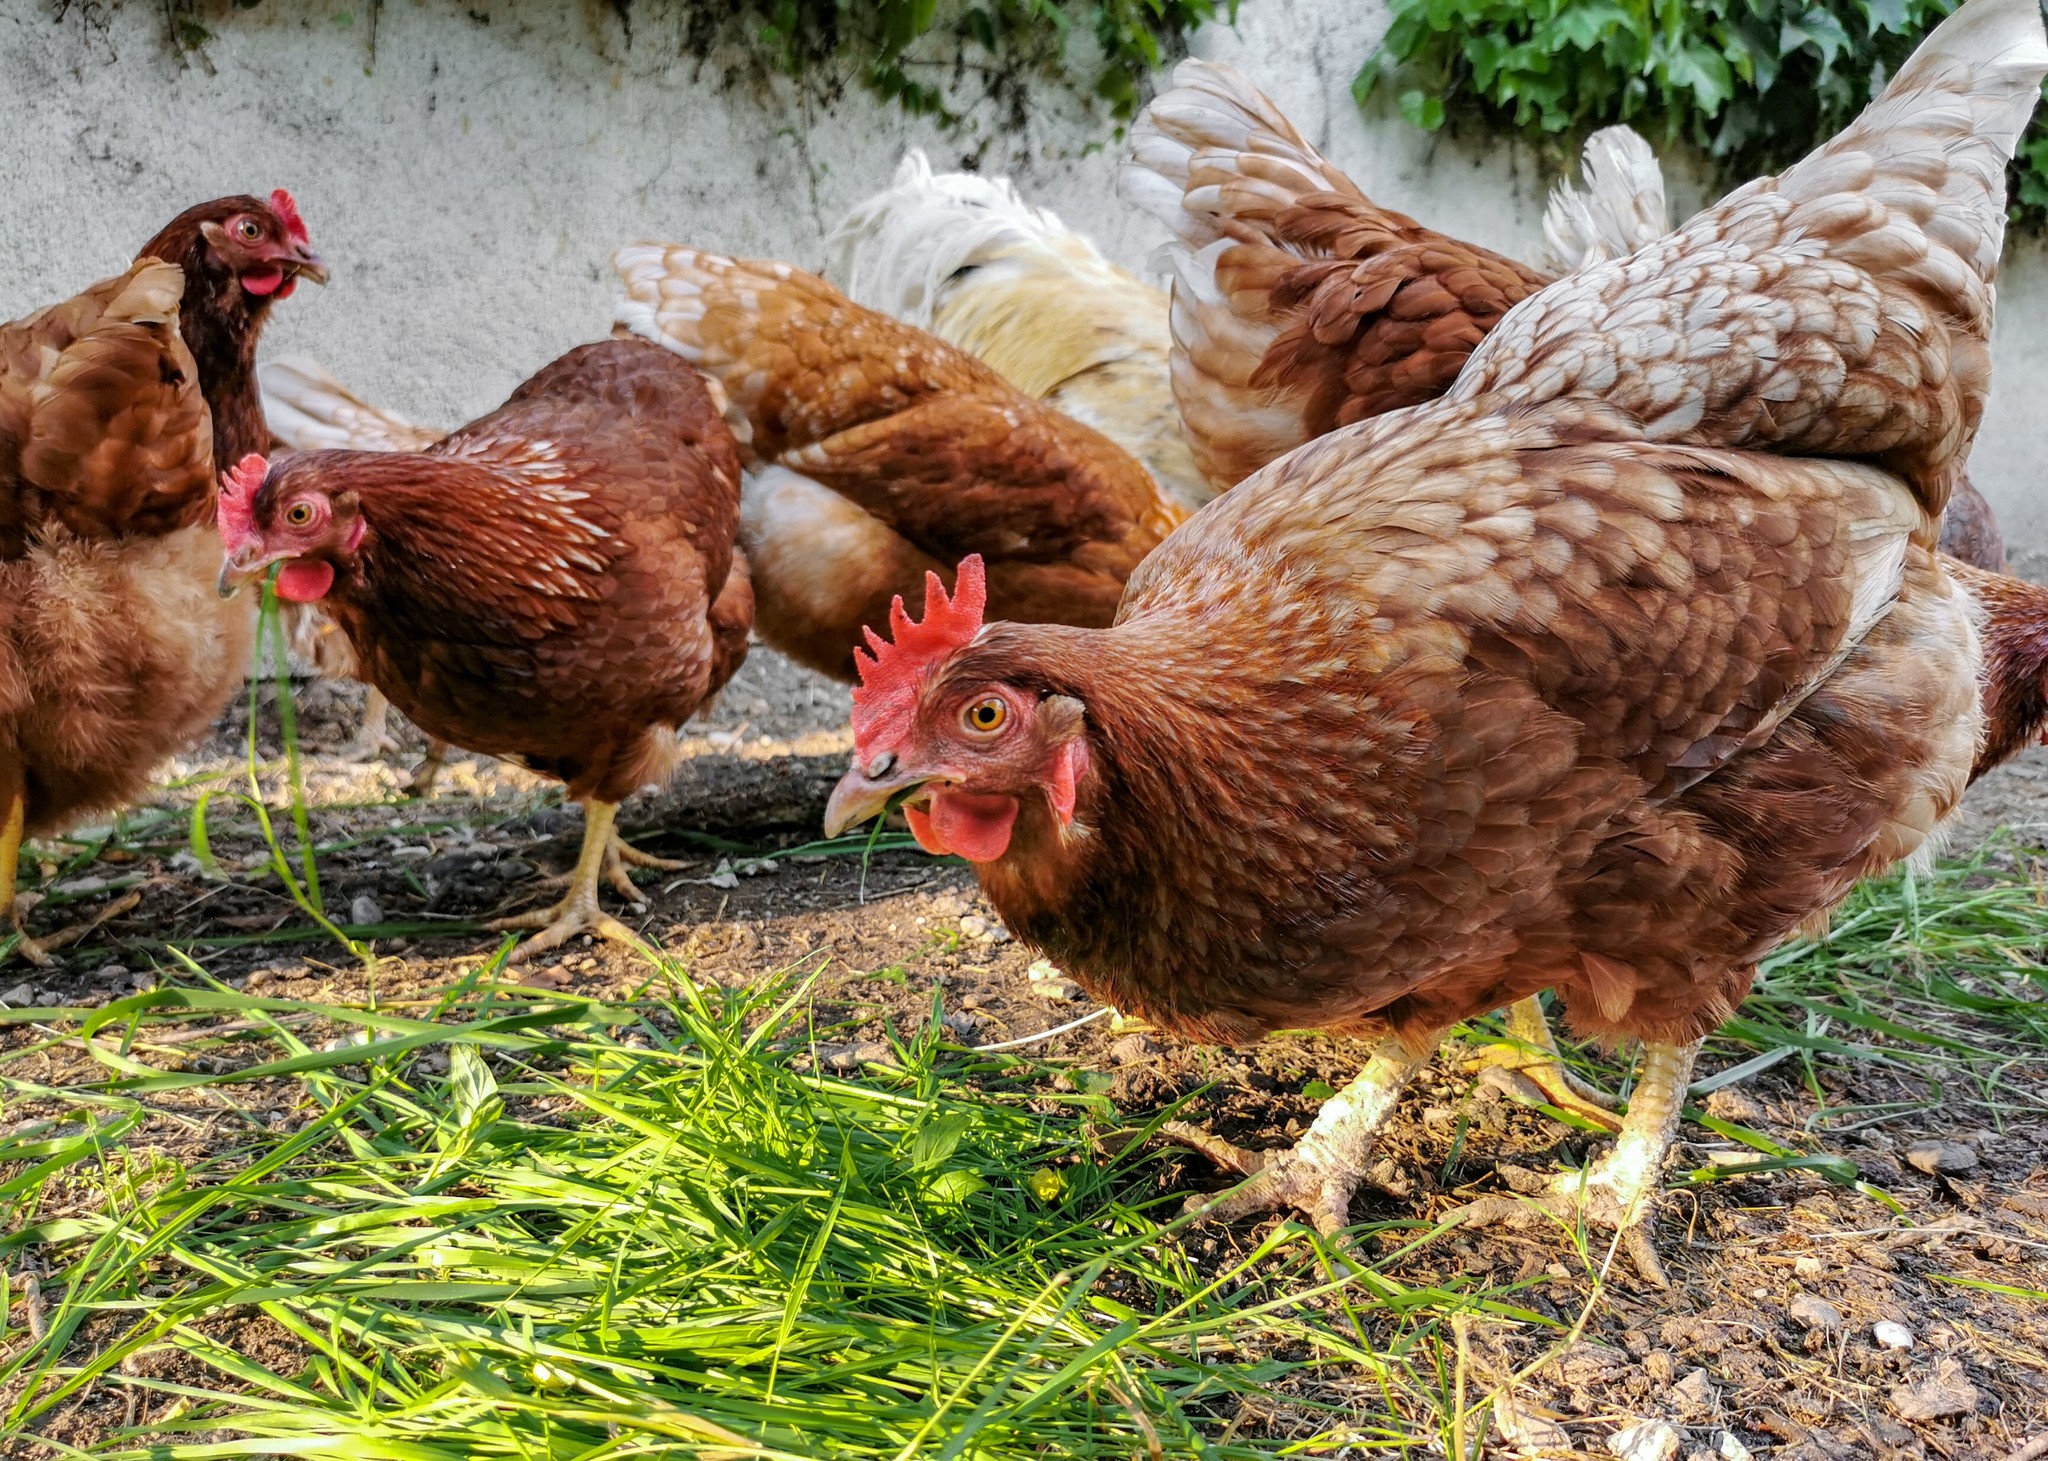 How to get rid of parasites and mites on chicken with natural remedies? 